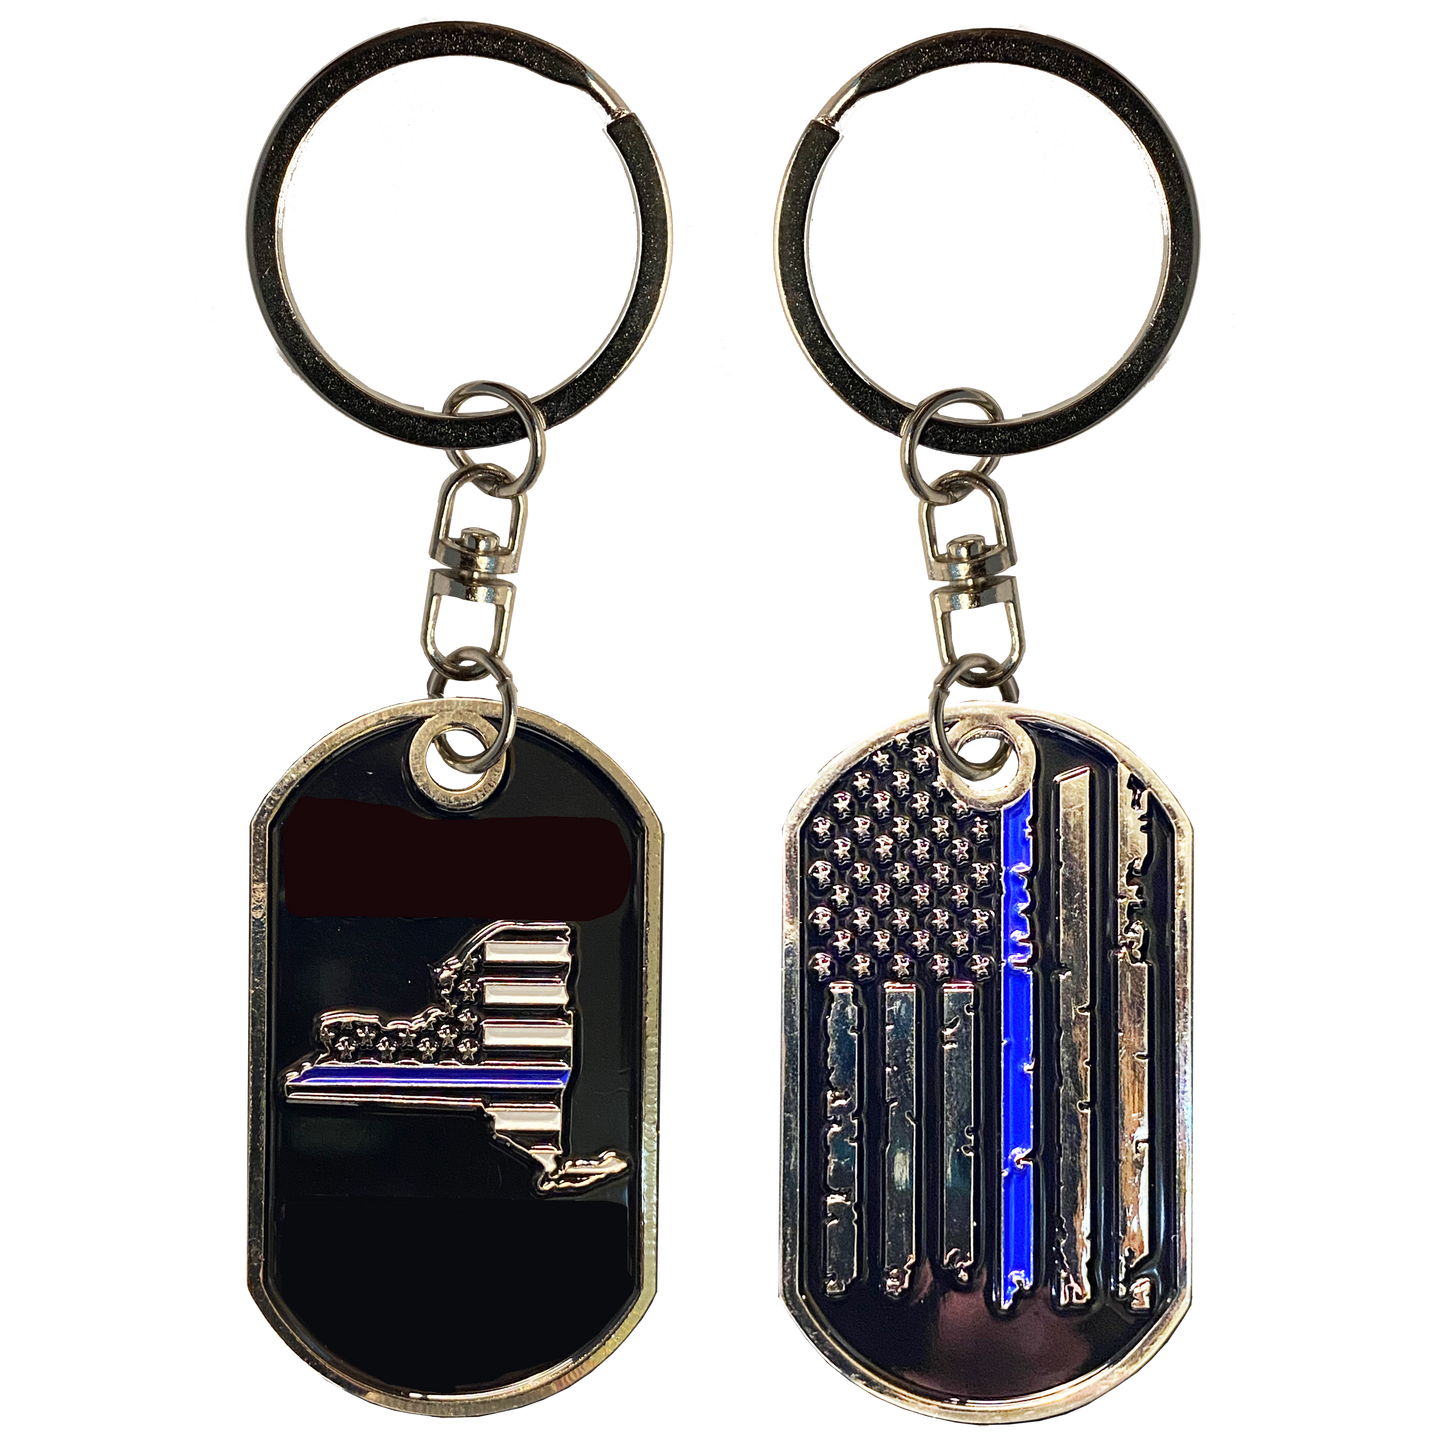 DL4-07 New York Thin Blue Line Challenge Coin Dog Tag keychain NYPD Hold the Line Police Law Enforcement FBI CBP Sheriff DEA ATF